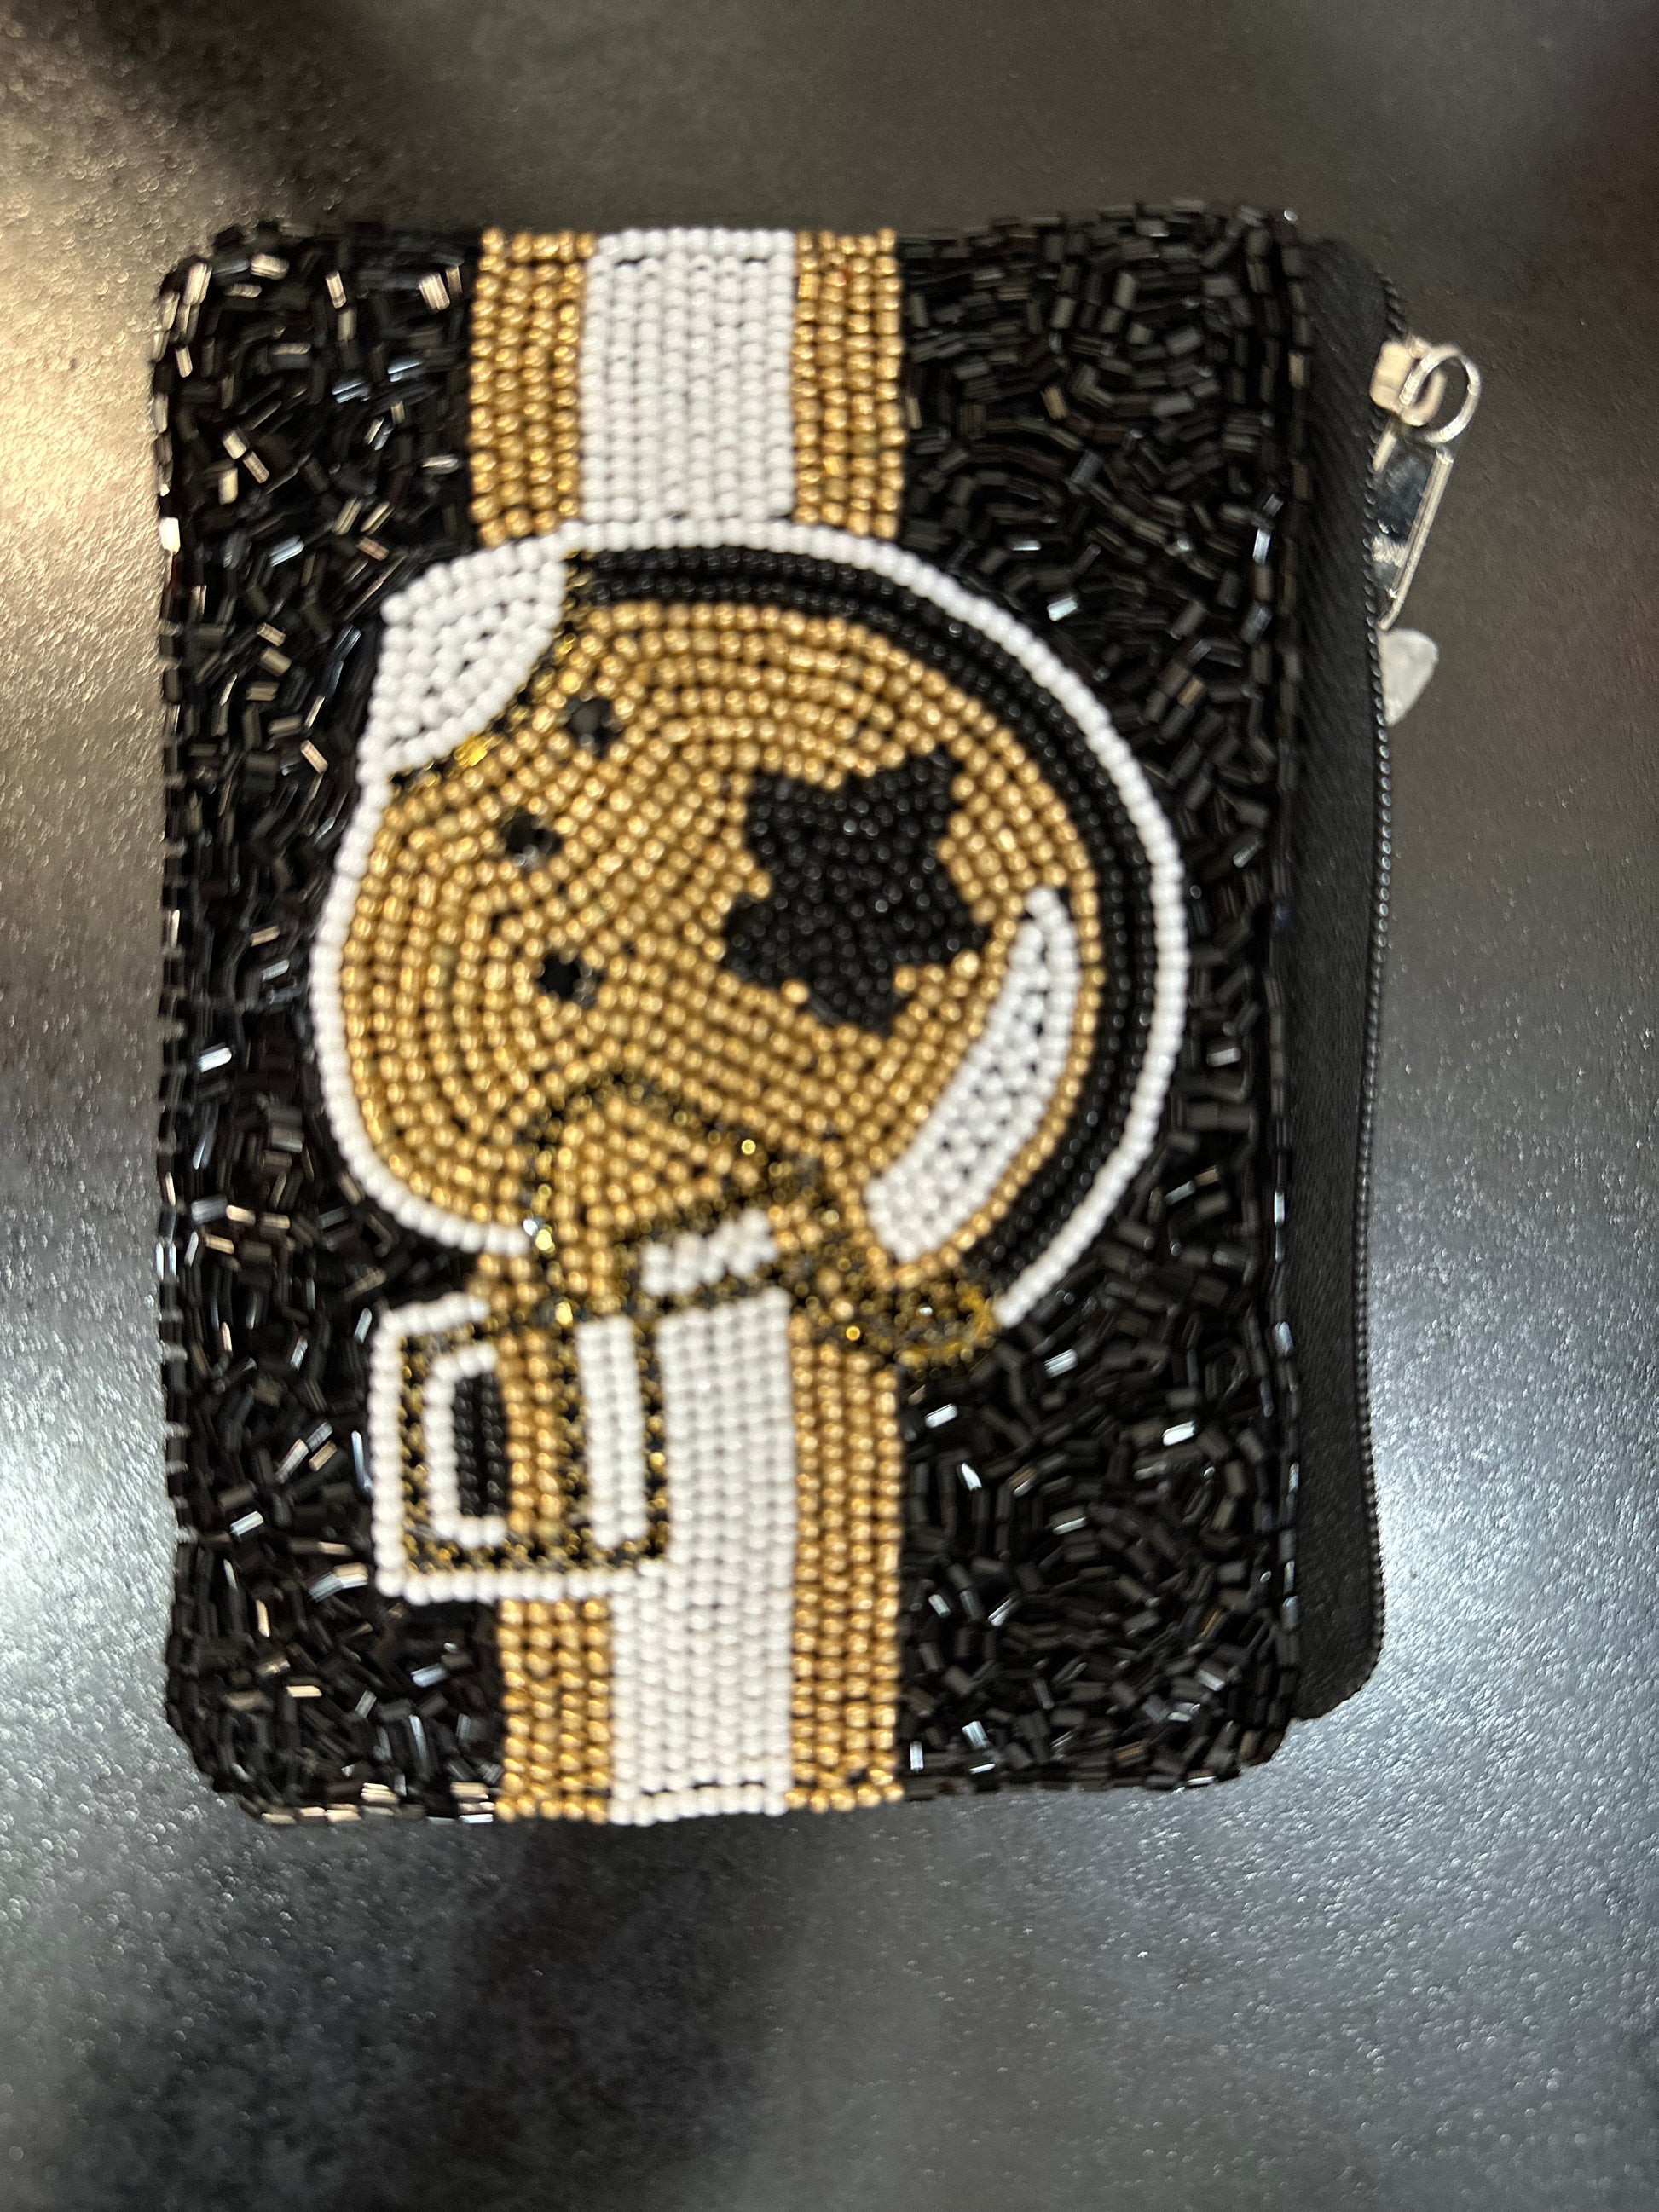 A black and gold Beaded Coin Purse - Saints Helmet with a football helmet on it by Misc Accessories.